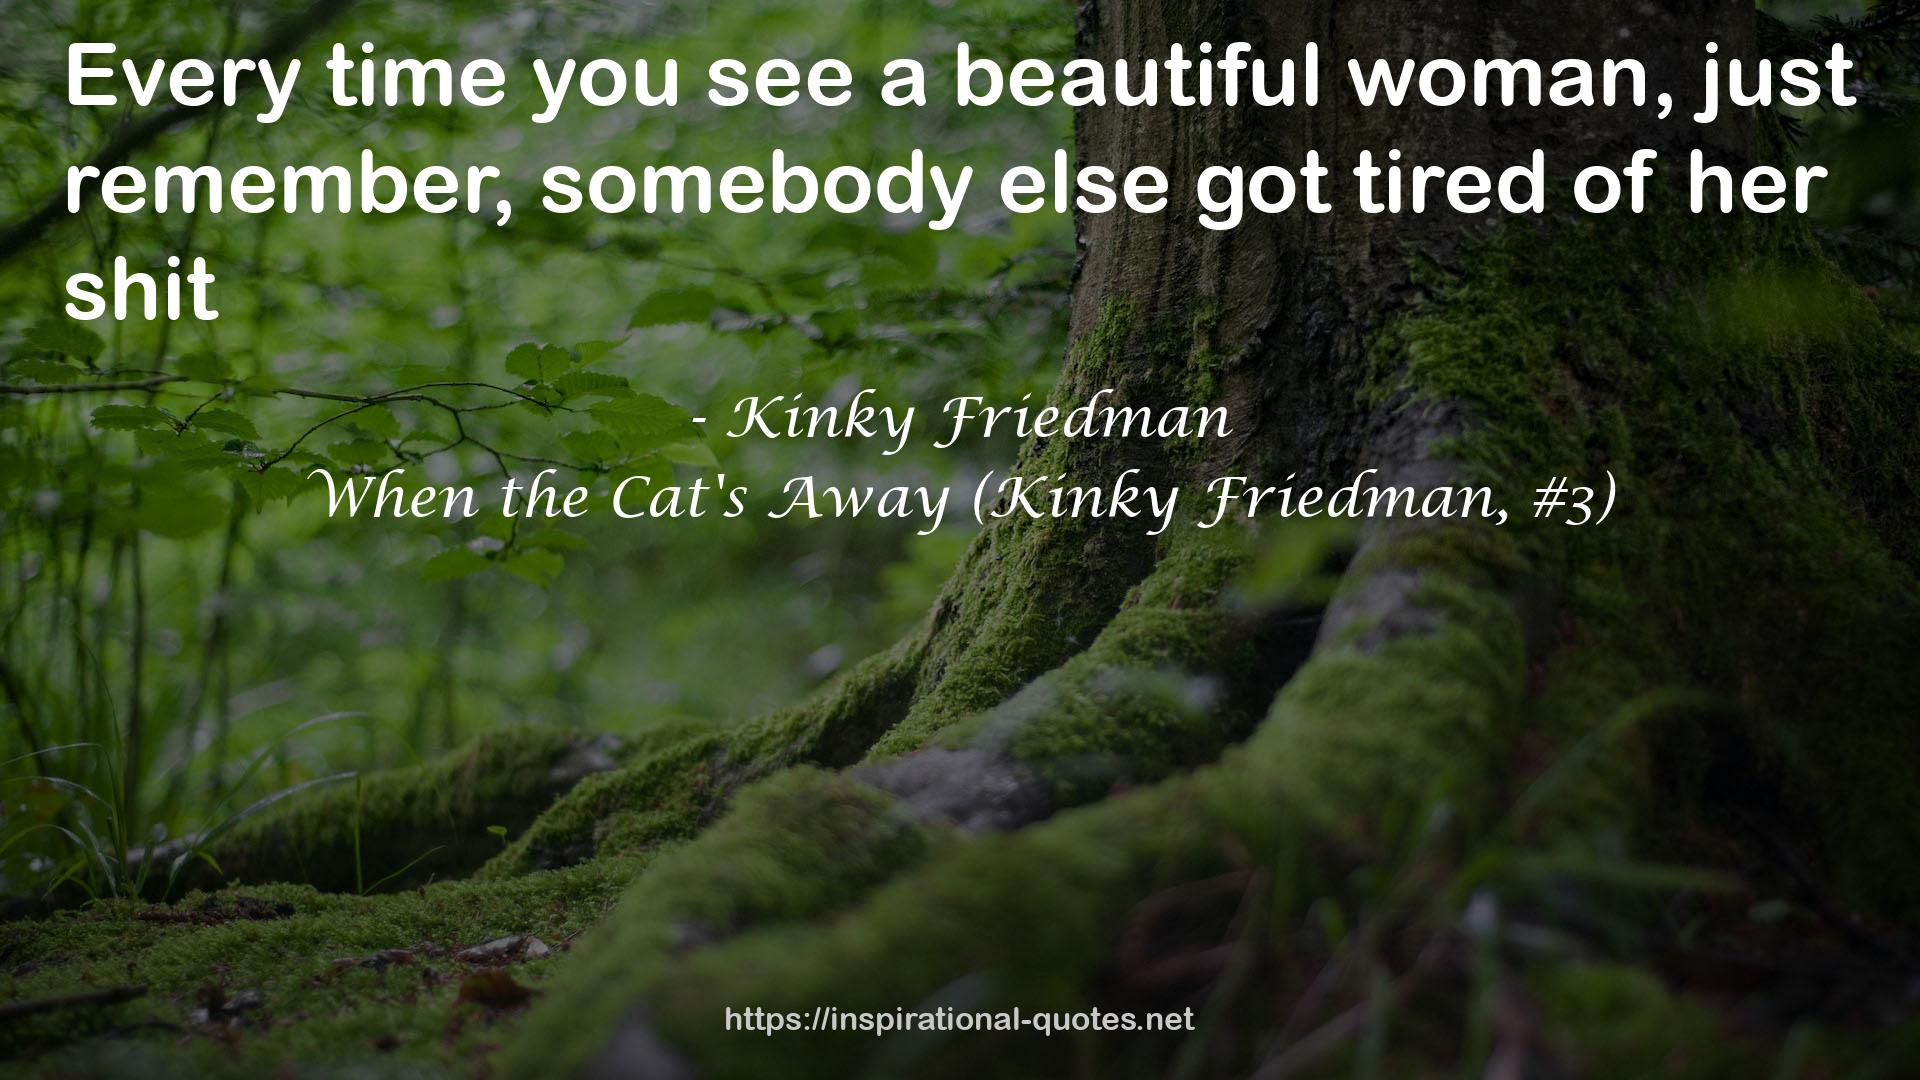 When the Cat's Away (Kinky Friedman, #3) QUOTES